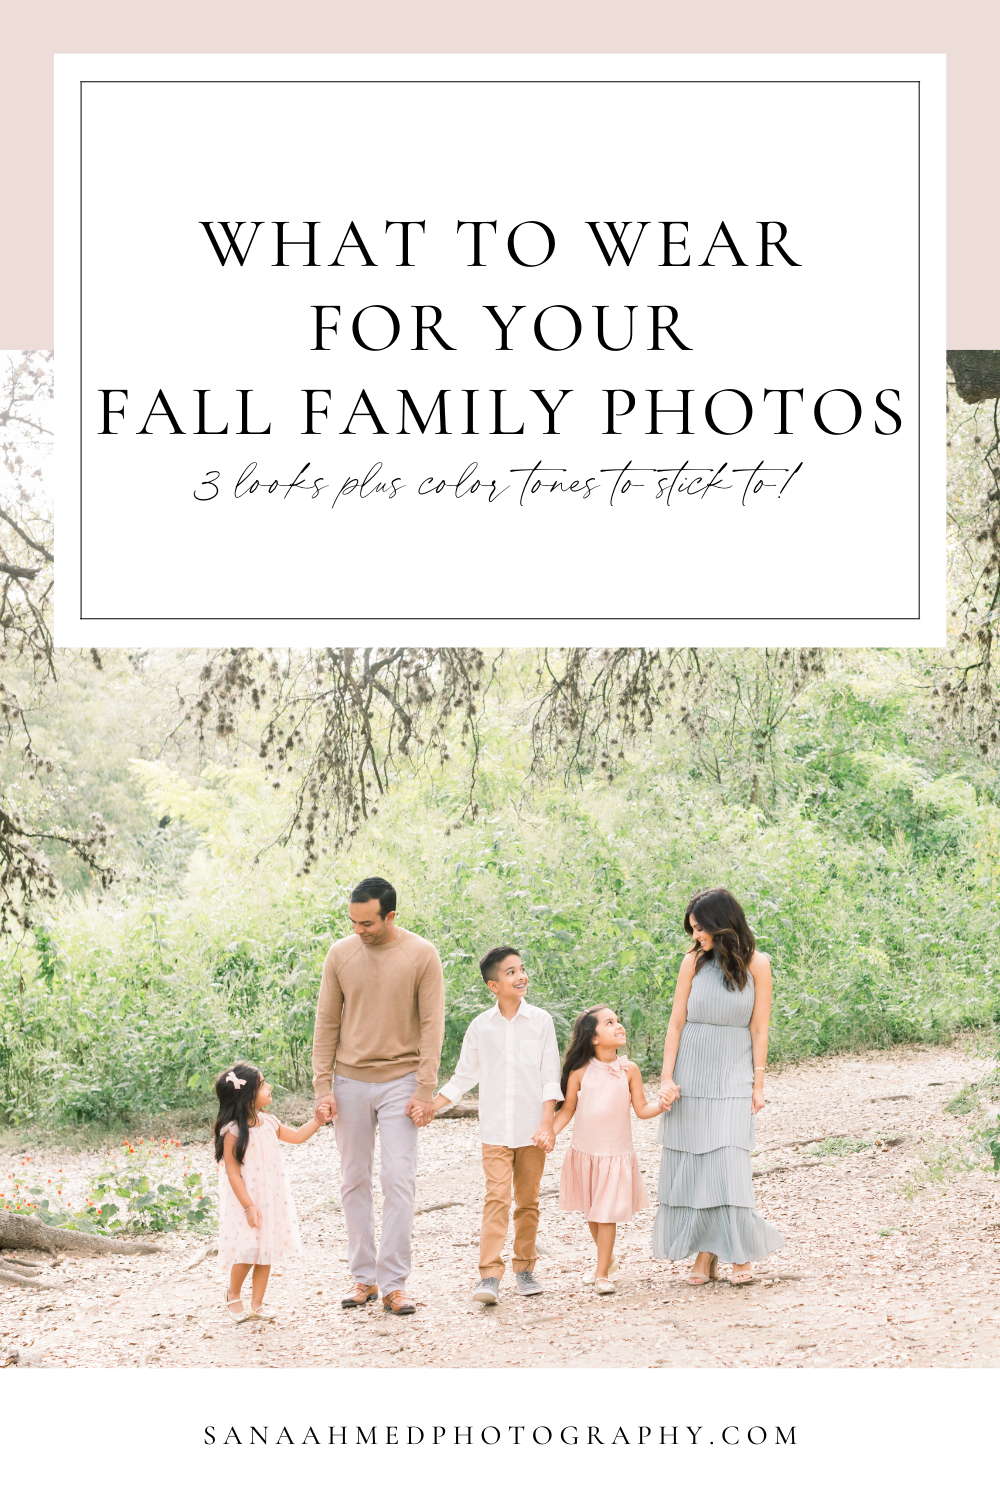 What to Wear for your Fall Family Photos and three looks with their color tones to help you decide by Sana Ahmed Photography.